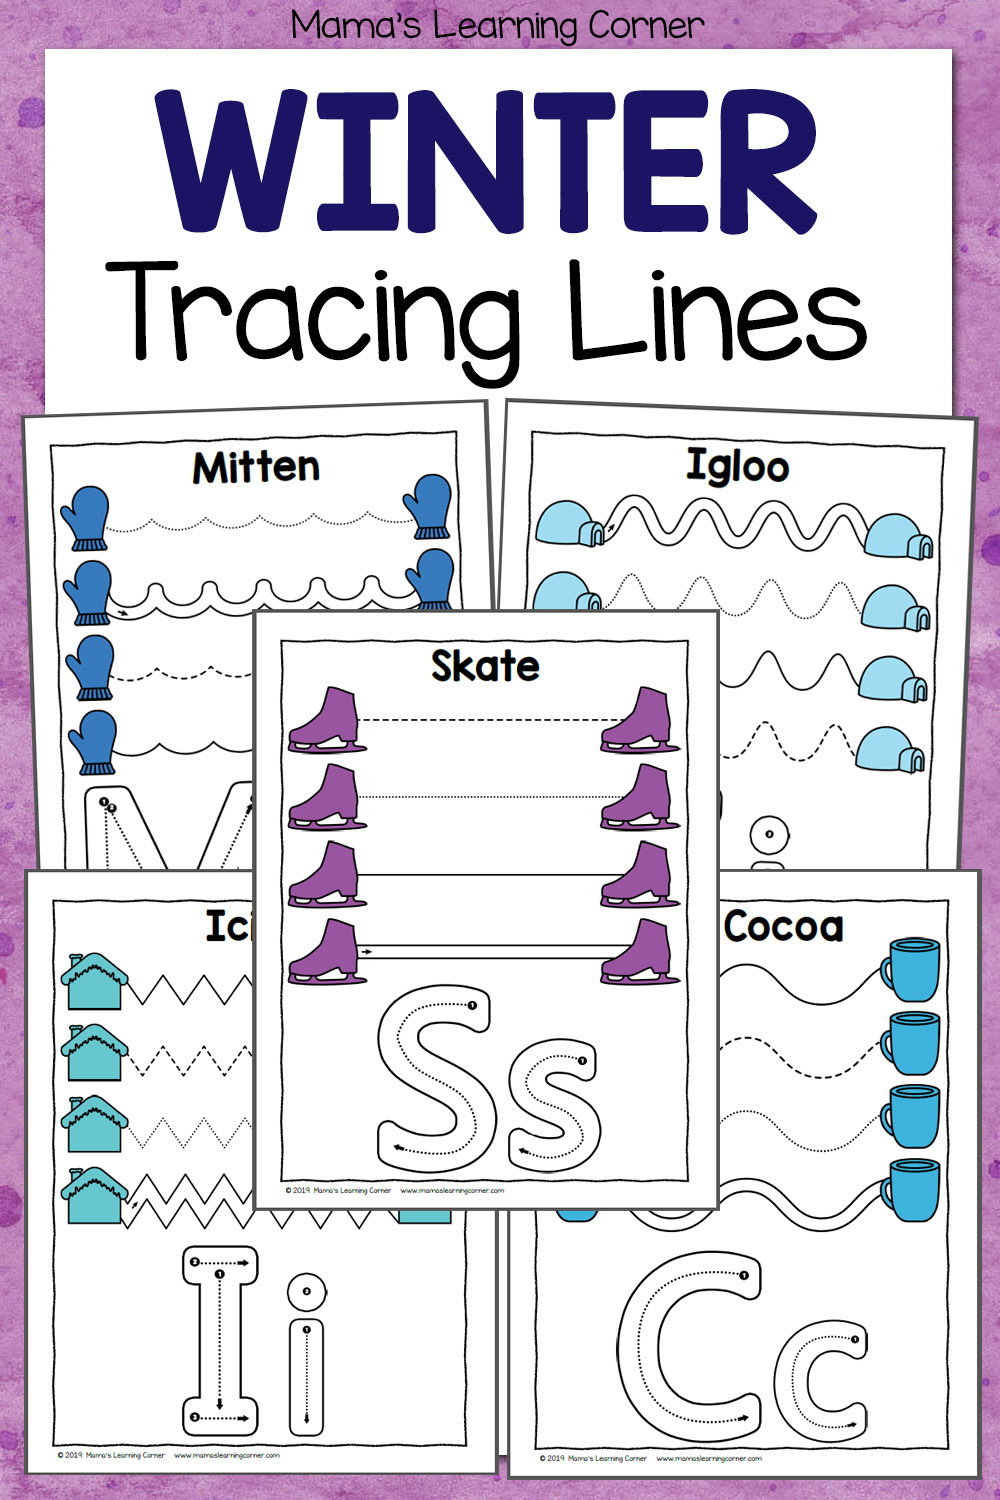 Winter Tracing Worksheets For Preschool - Mamas Learning Corner